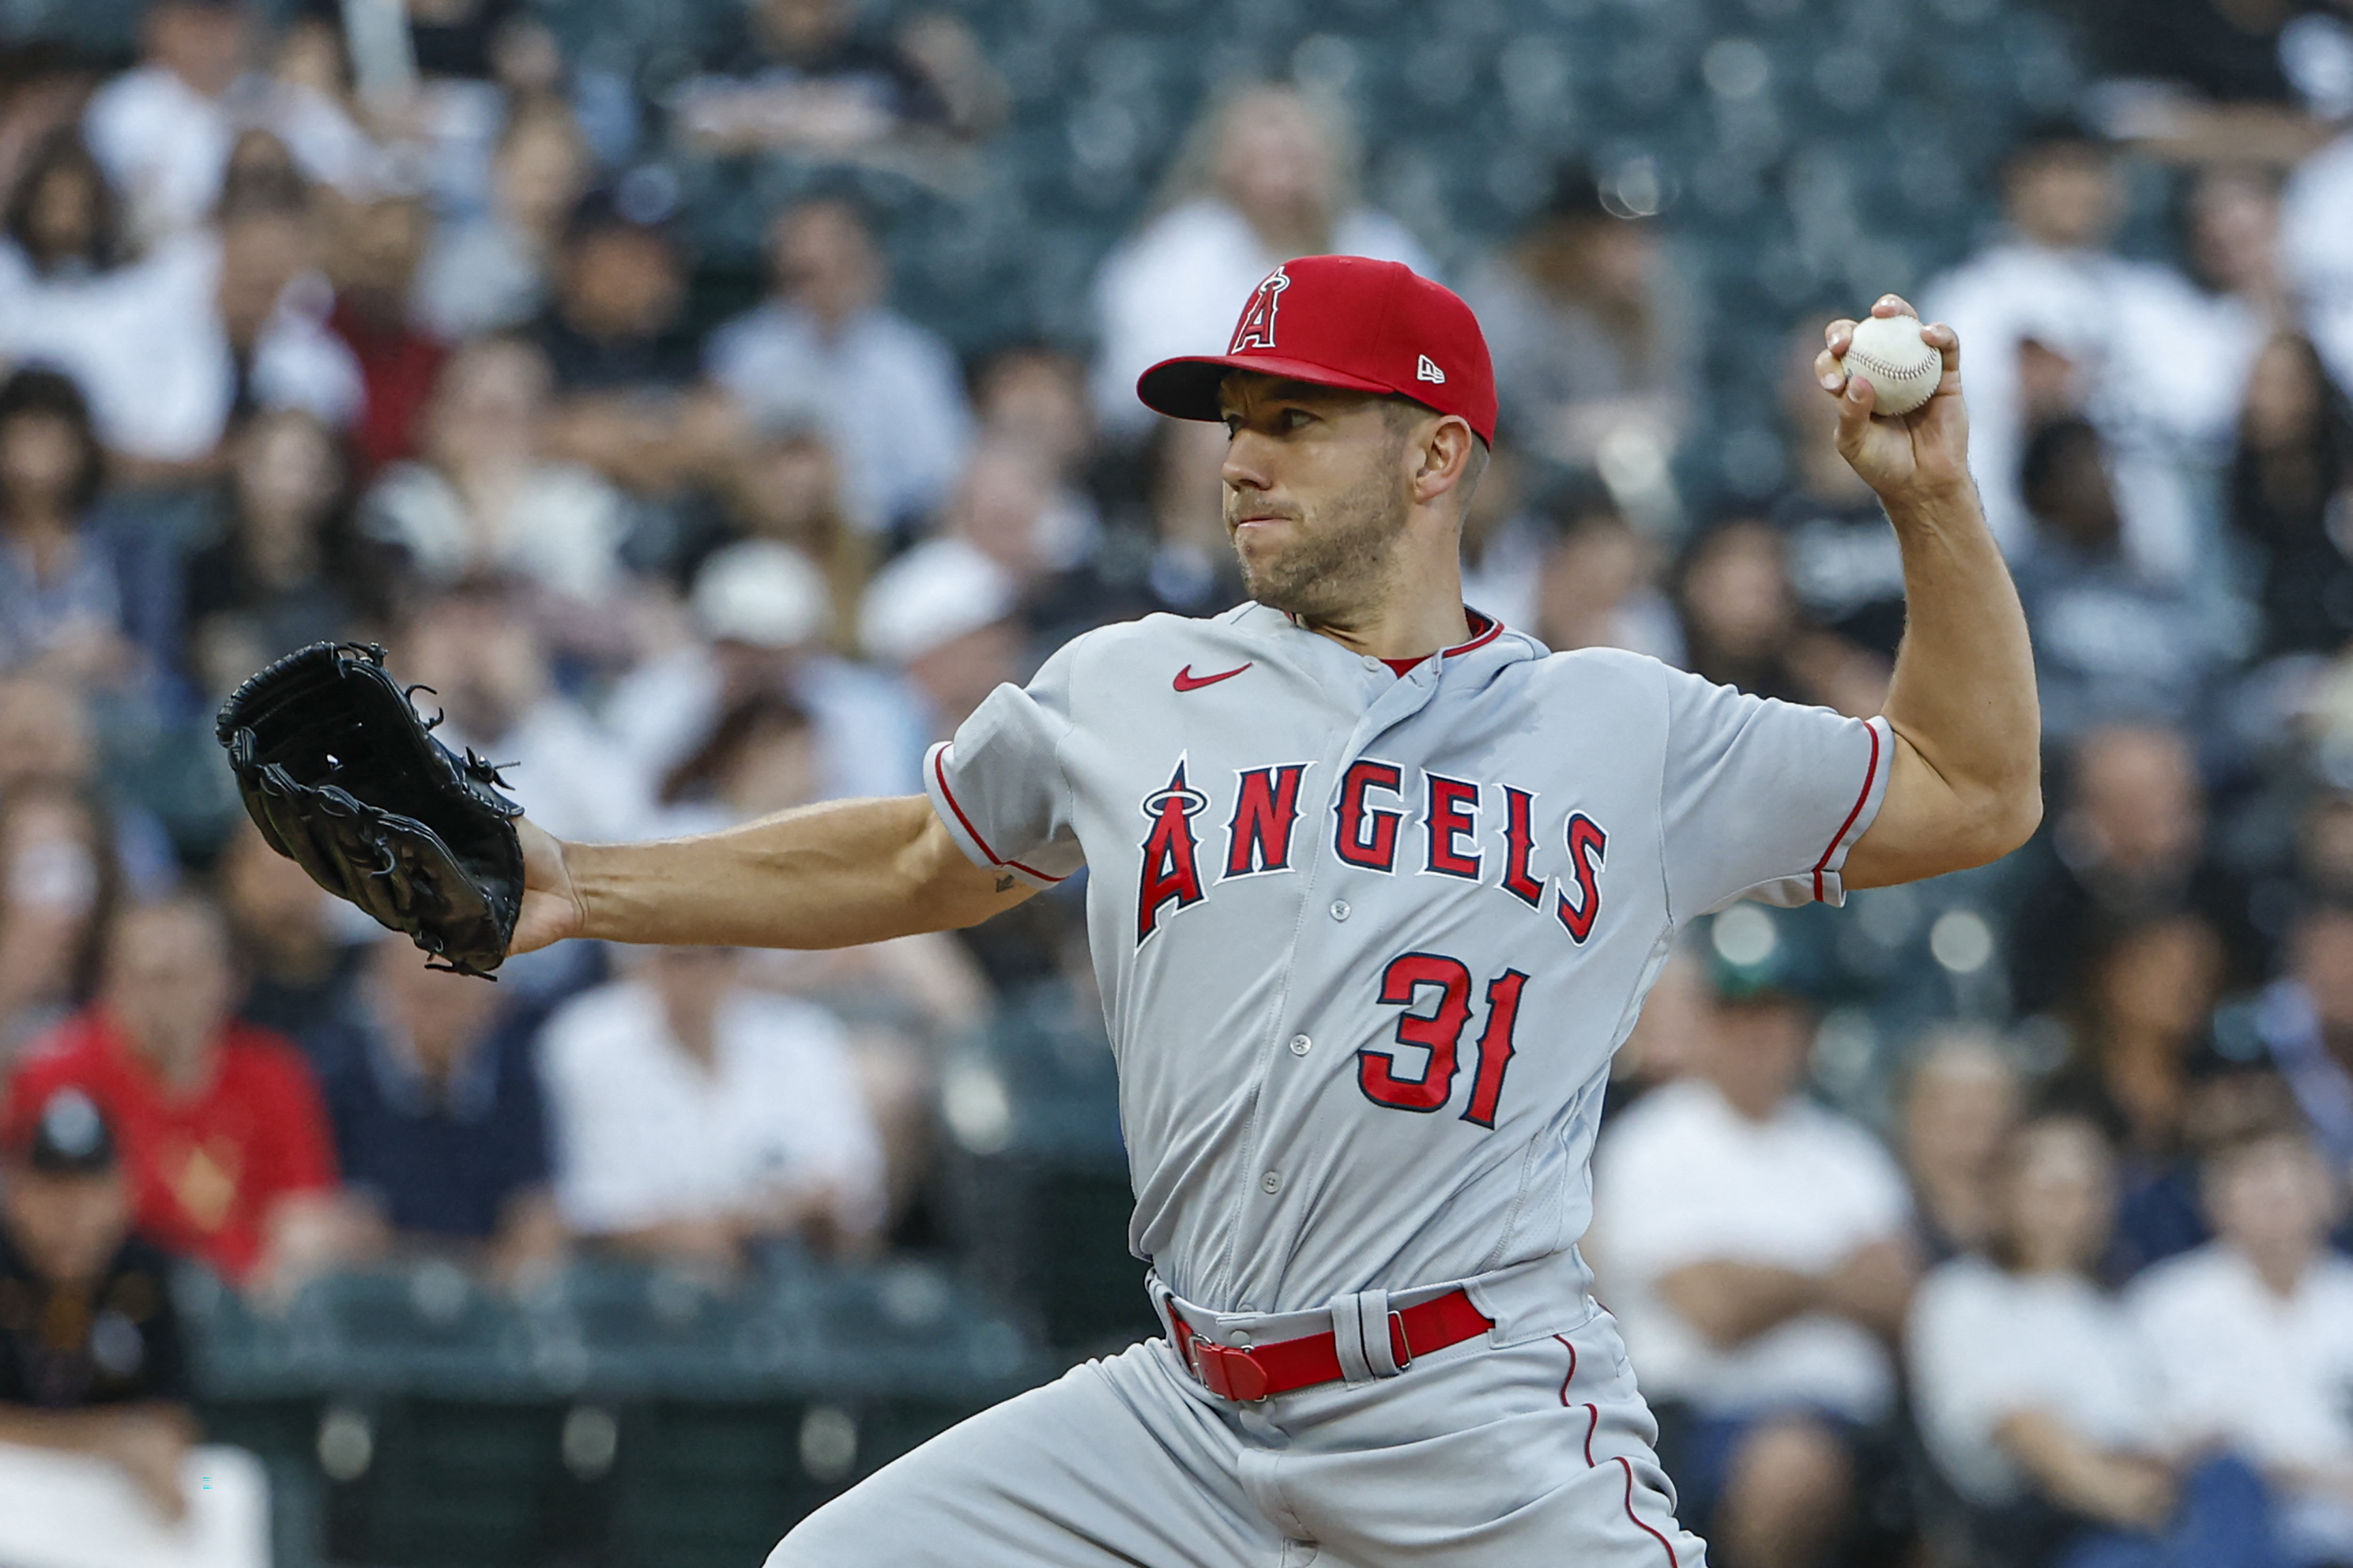 White Sox lose opening series to Angels